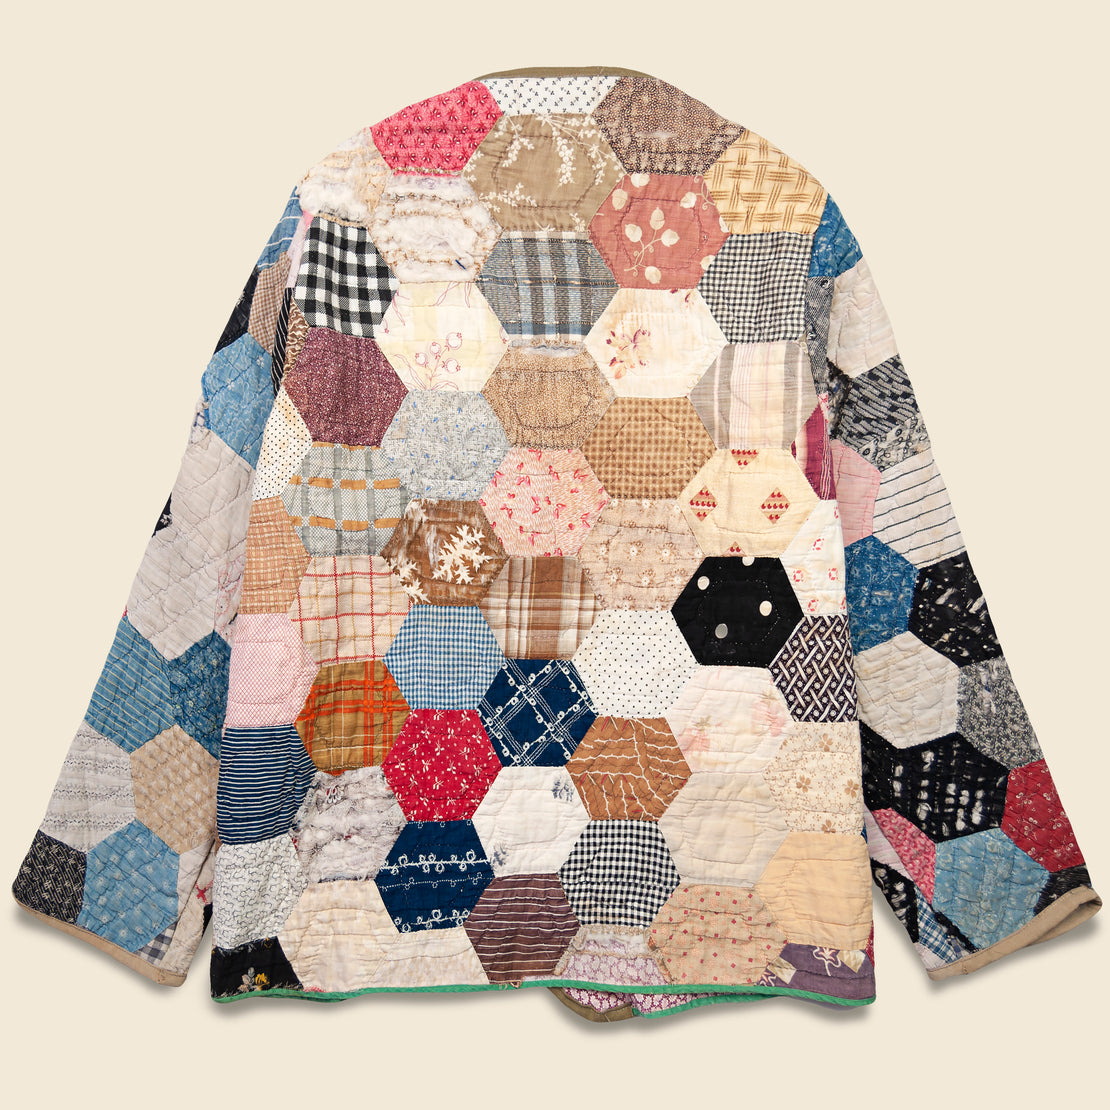 Scofield Hexagon w/ Paisley Lining Quilt Kimono - Multi - Vintage - STAG Provisions - W - One & Done - Apparel